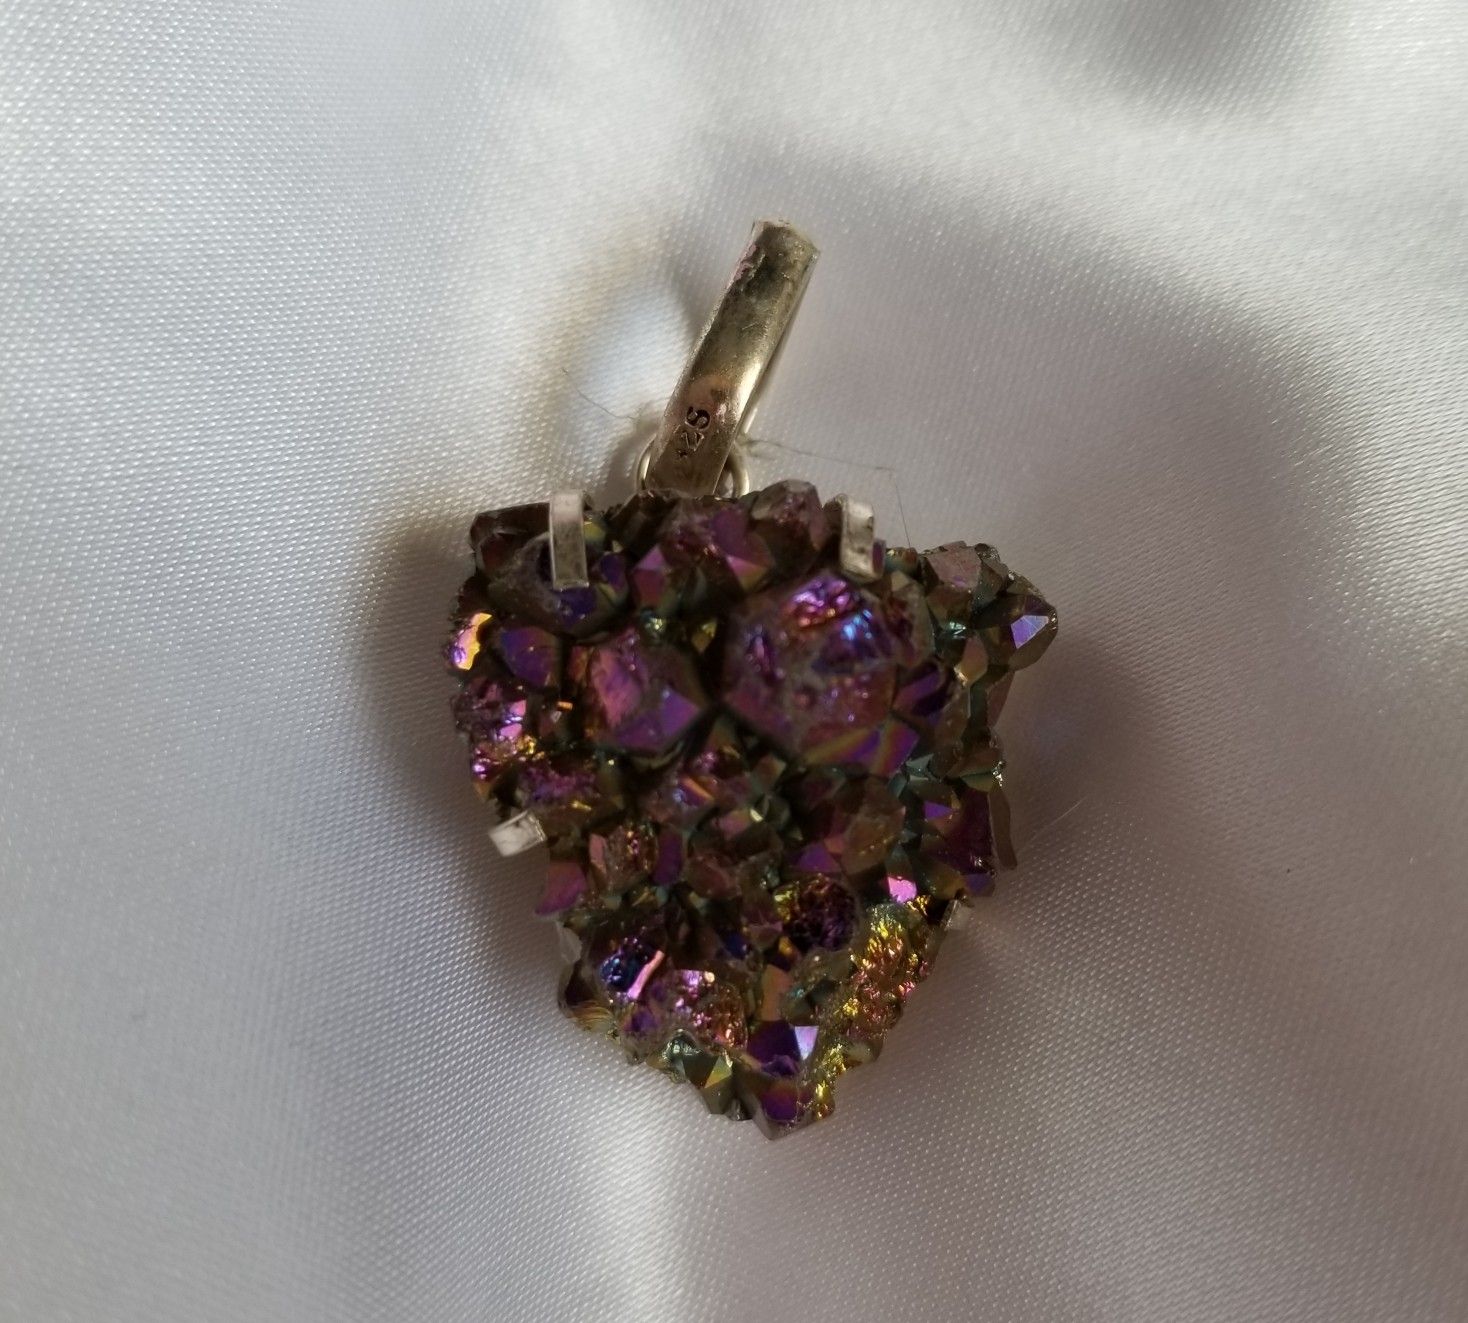 Druzy purple gemstone in sterling silver pendant 1 and 3/4 inches long